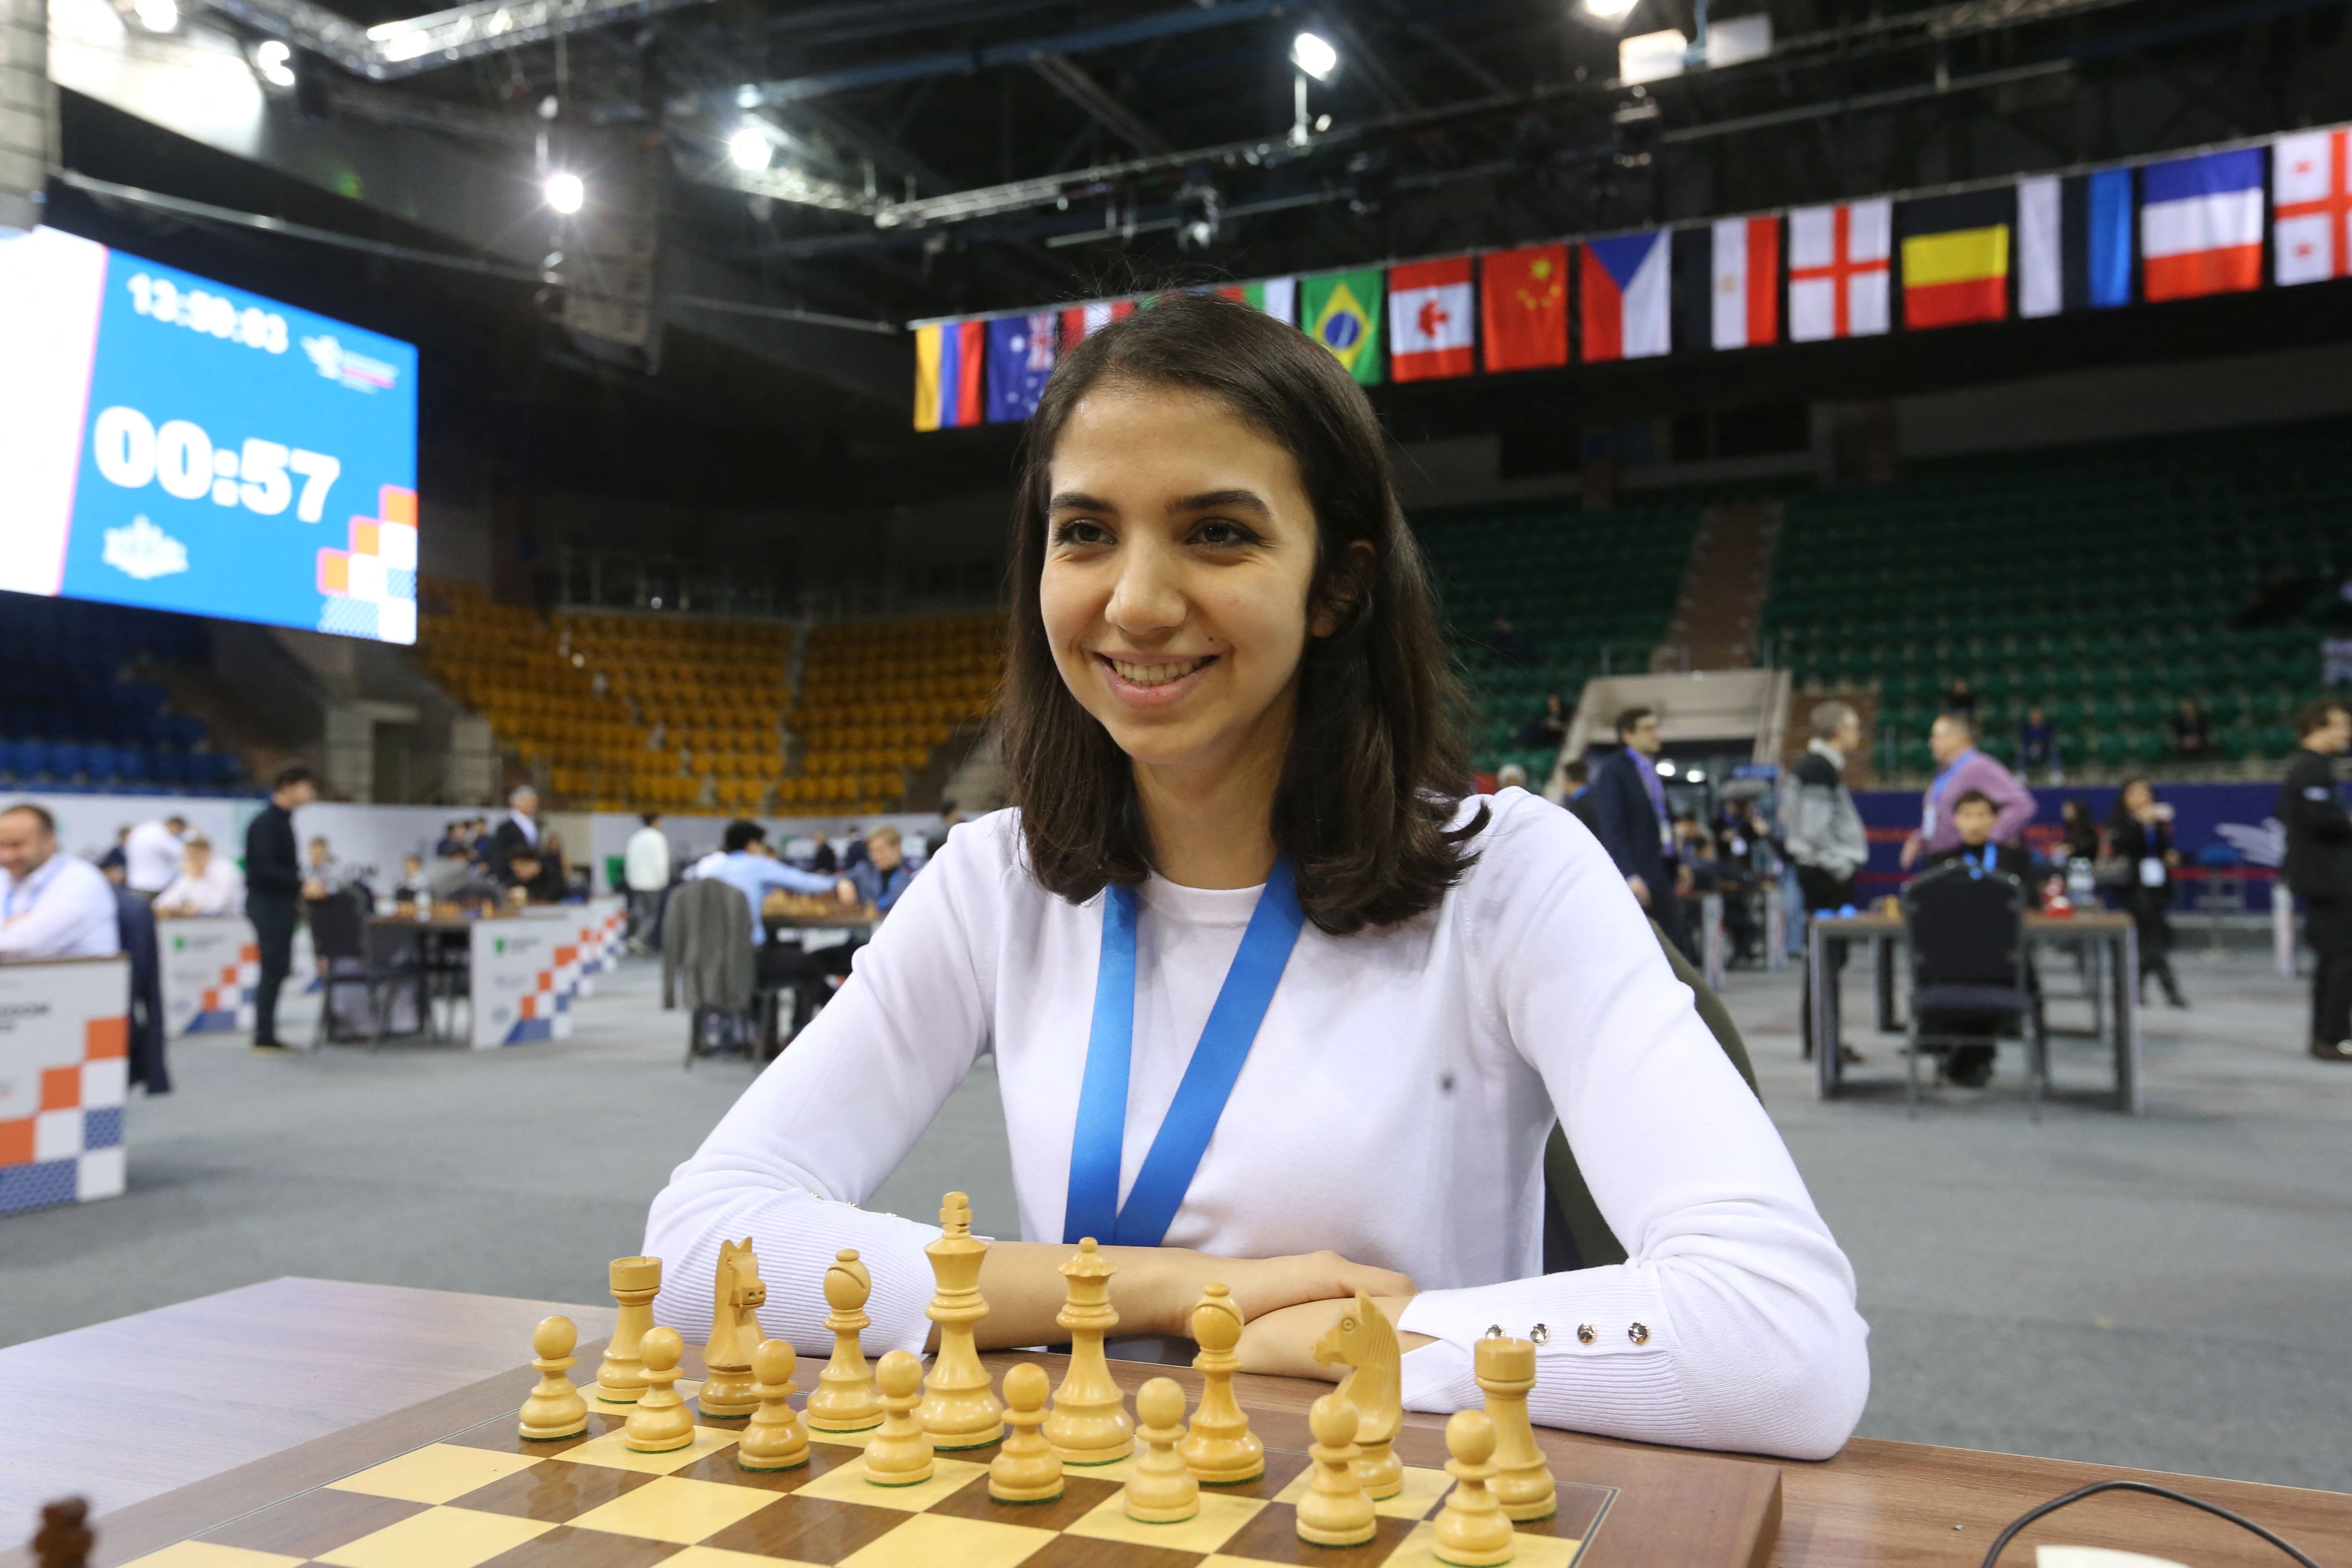 Iranian chess player who removed hijab gets Spanish citizenship